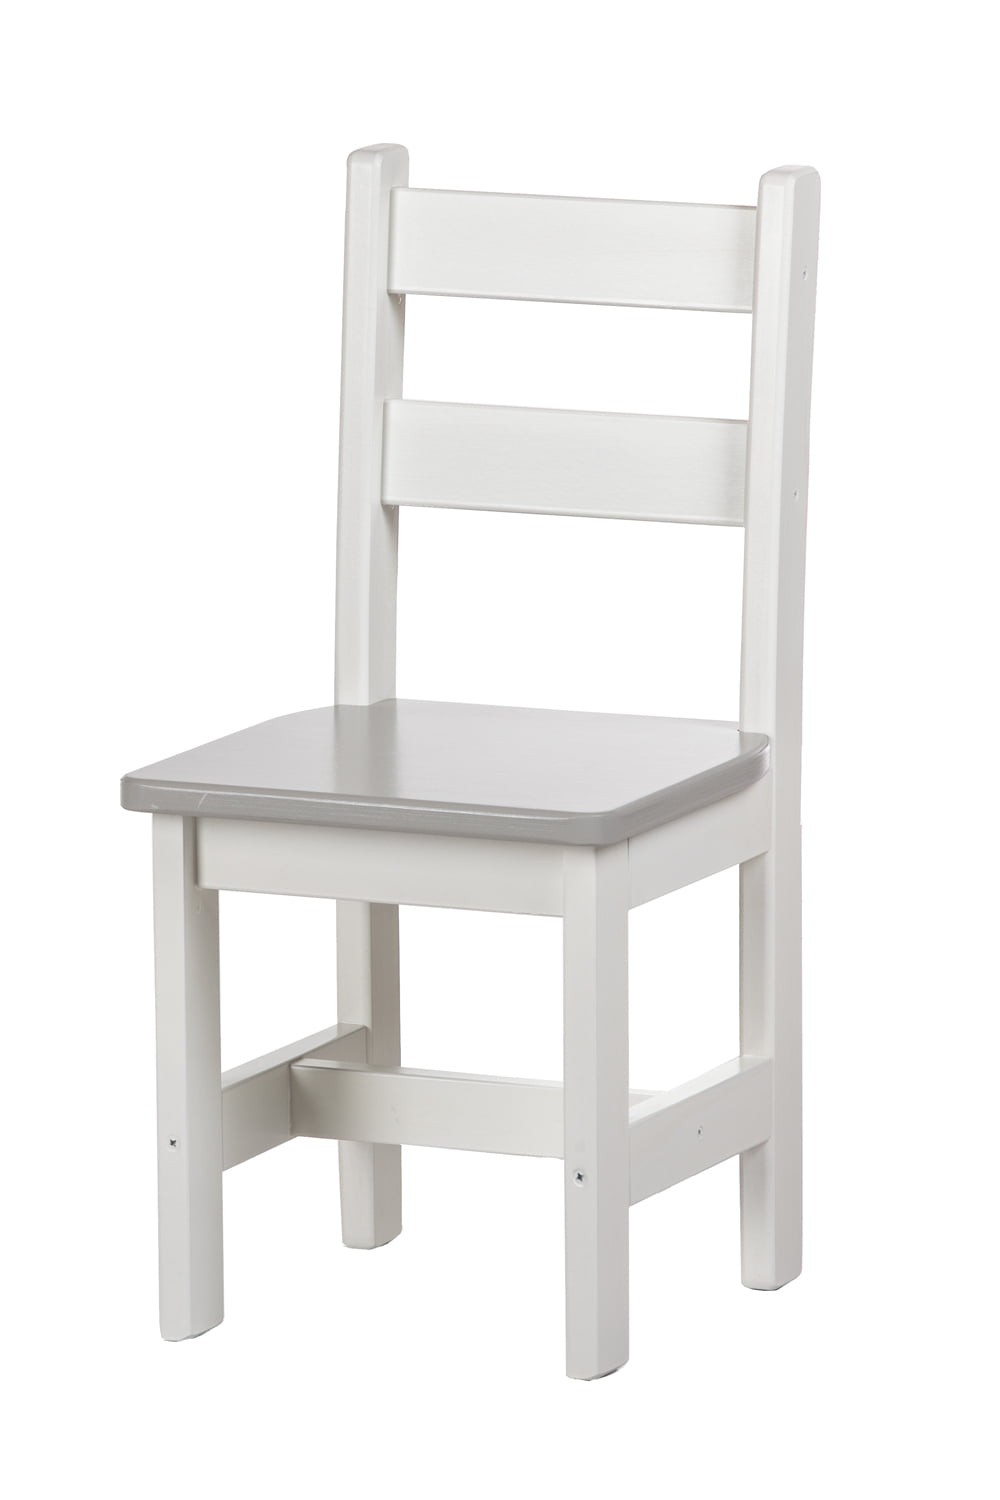 Child's Real Wood Chair - White / Grey